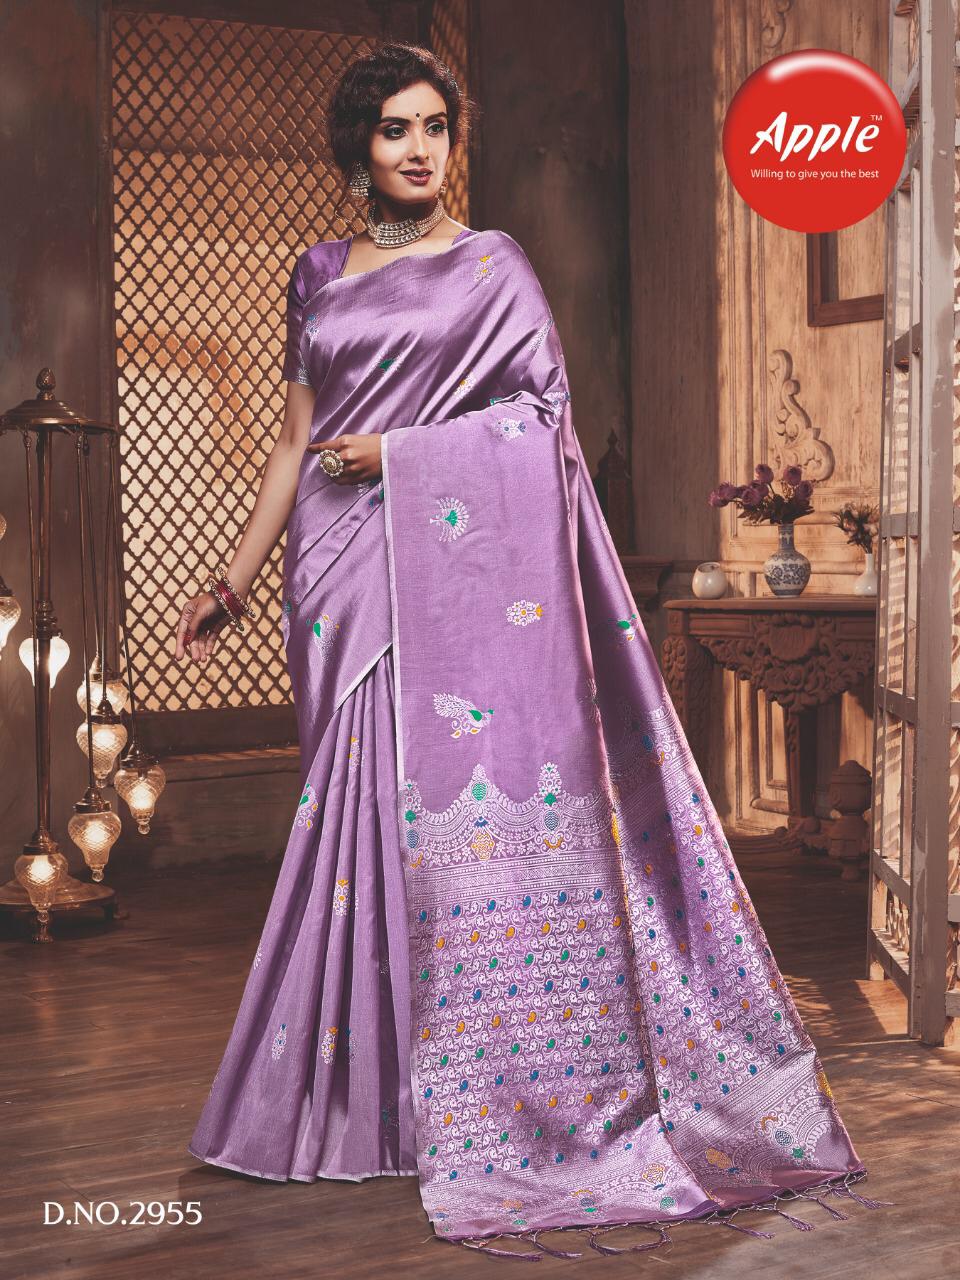 Shangrila pure orgenza vol 2 floral printed sarees collection